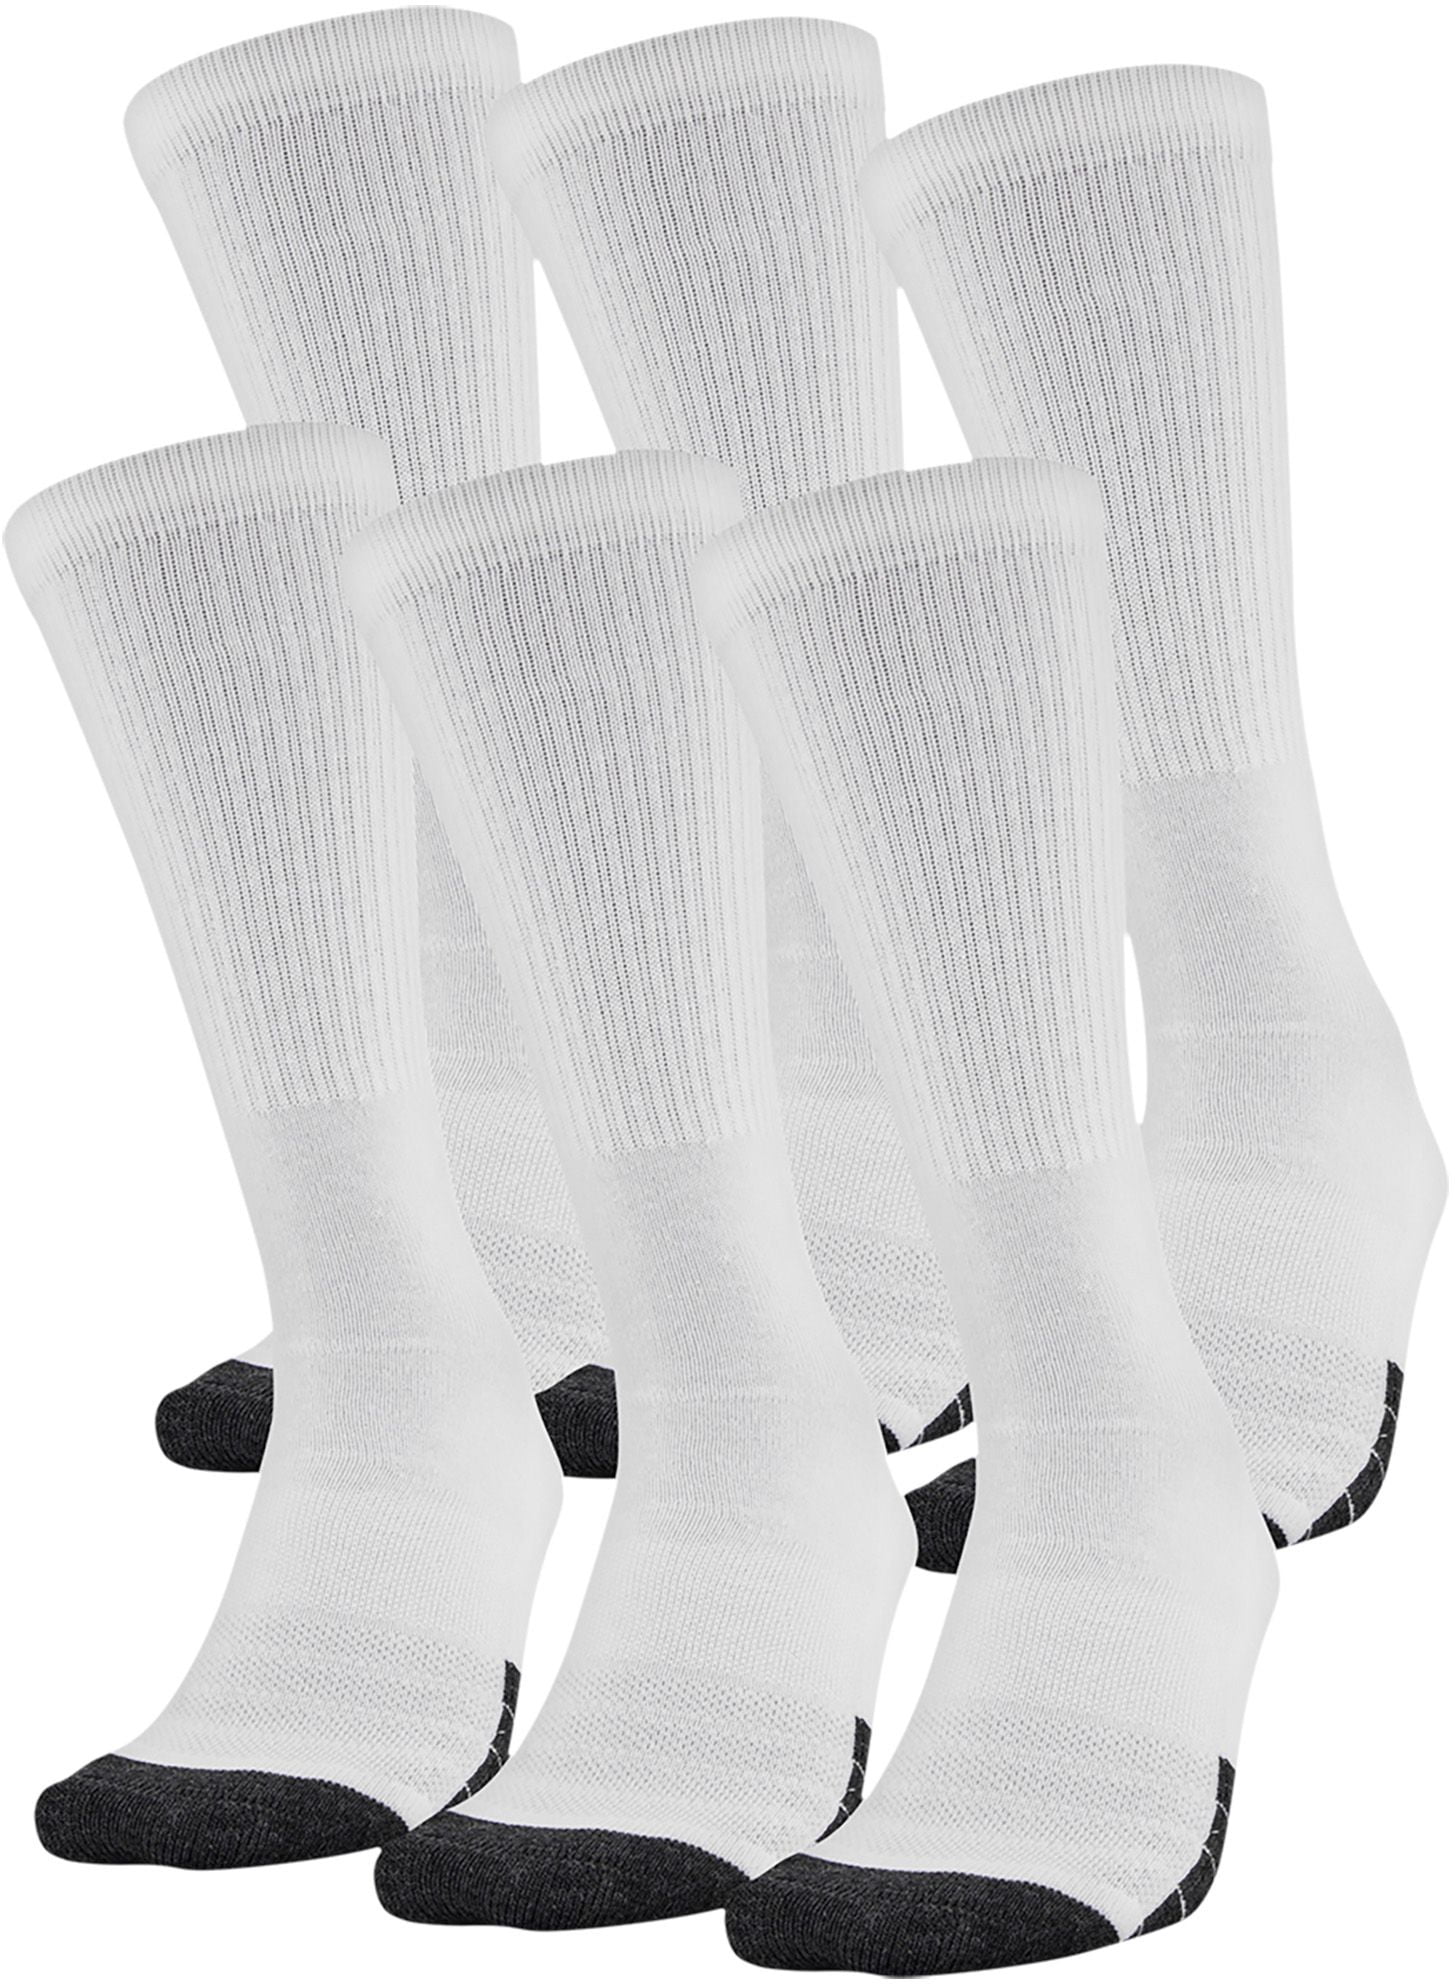 Under Armour Adult Performance Tech Crew Socks, 6-Pairs, White, Shoe Size:  Mens 9-12.5, Womens 11-13 